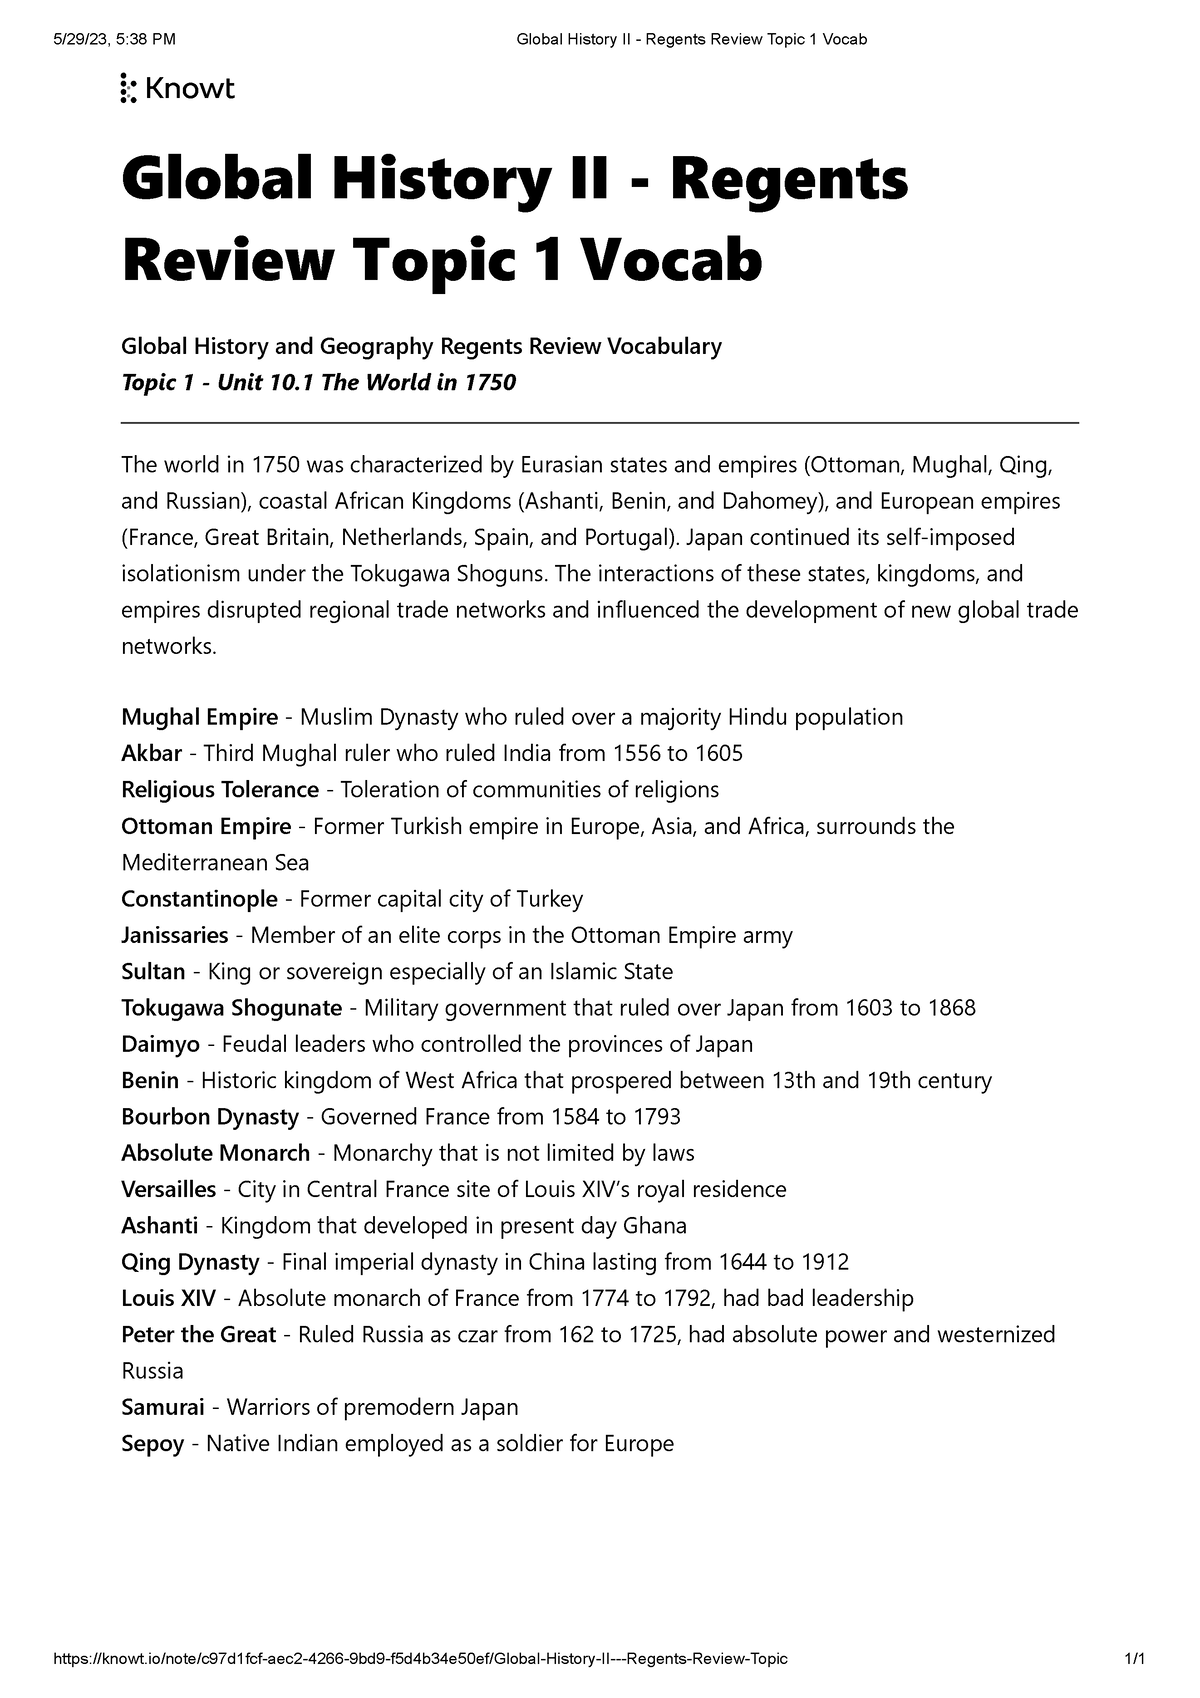 Global History II Regents Review Topic 1 Vocab Japan continued its